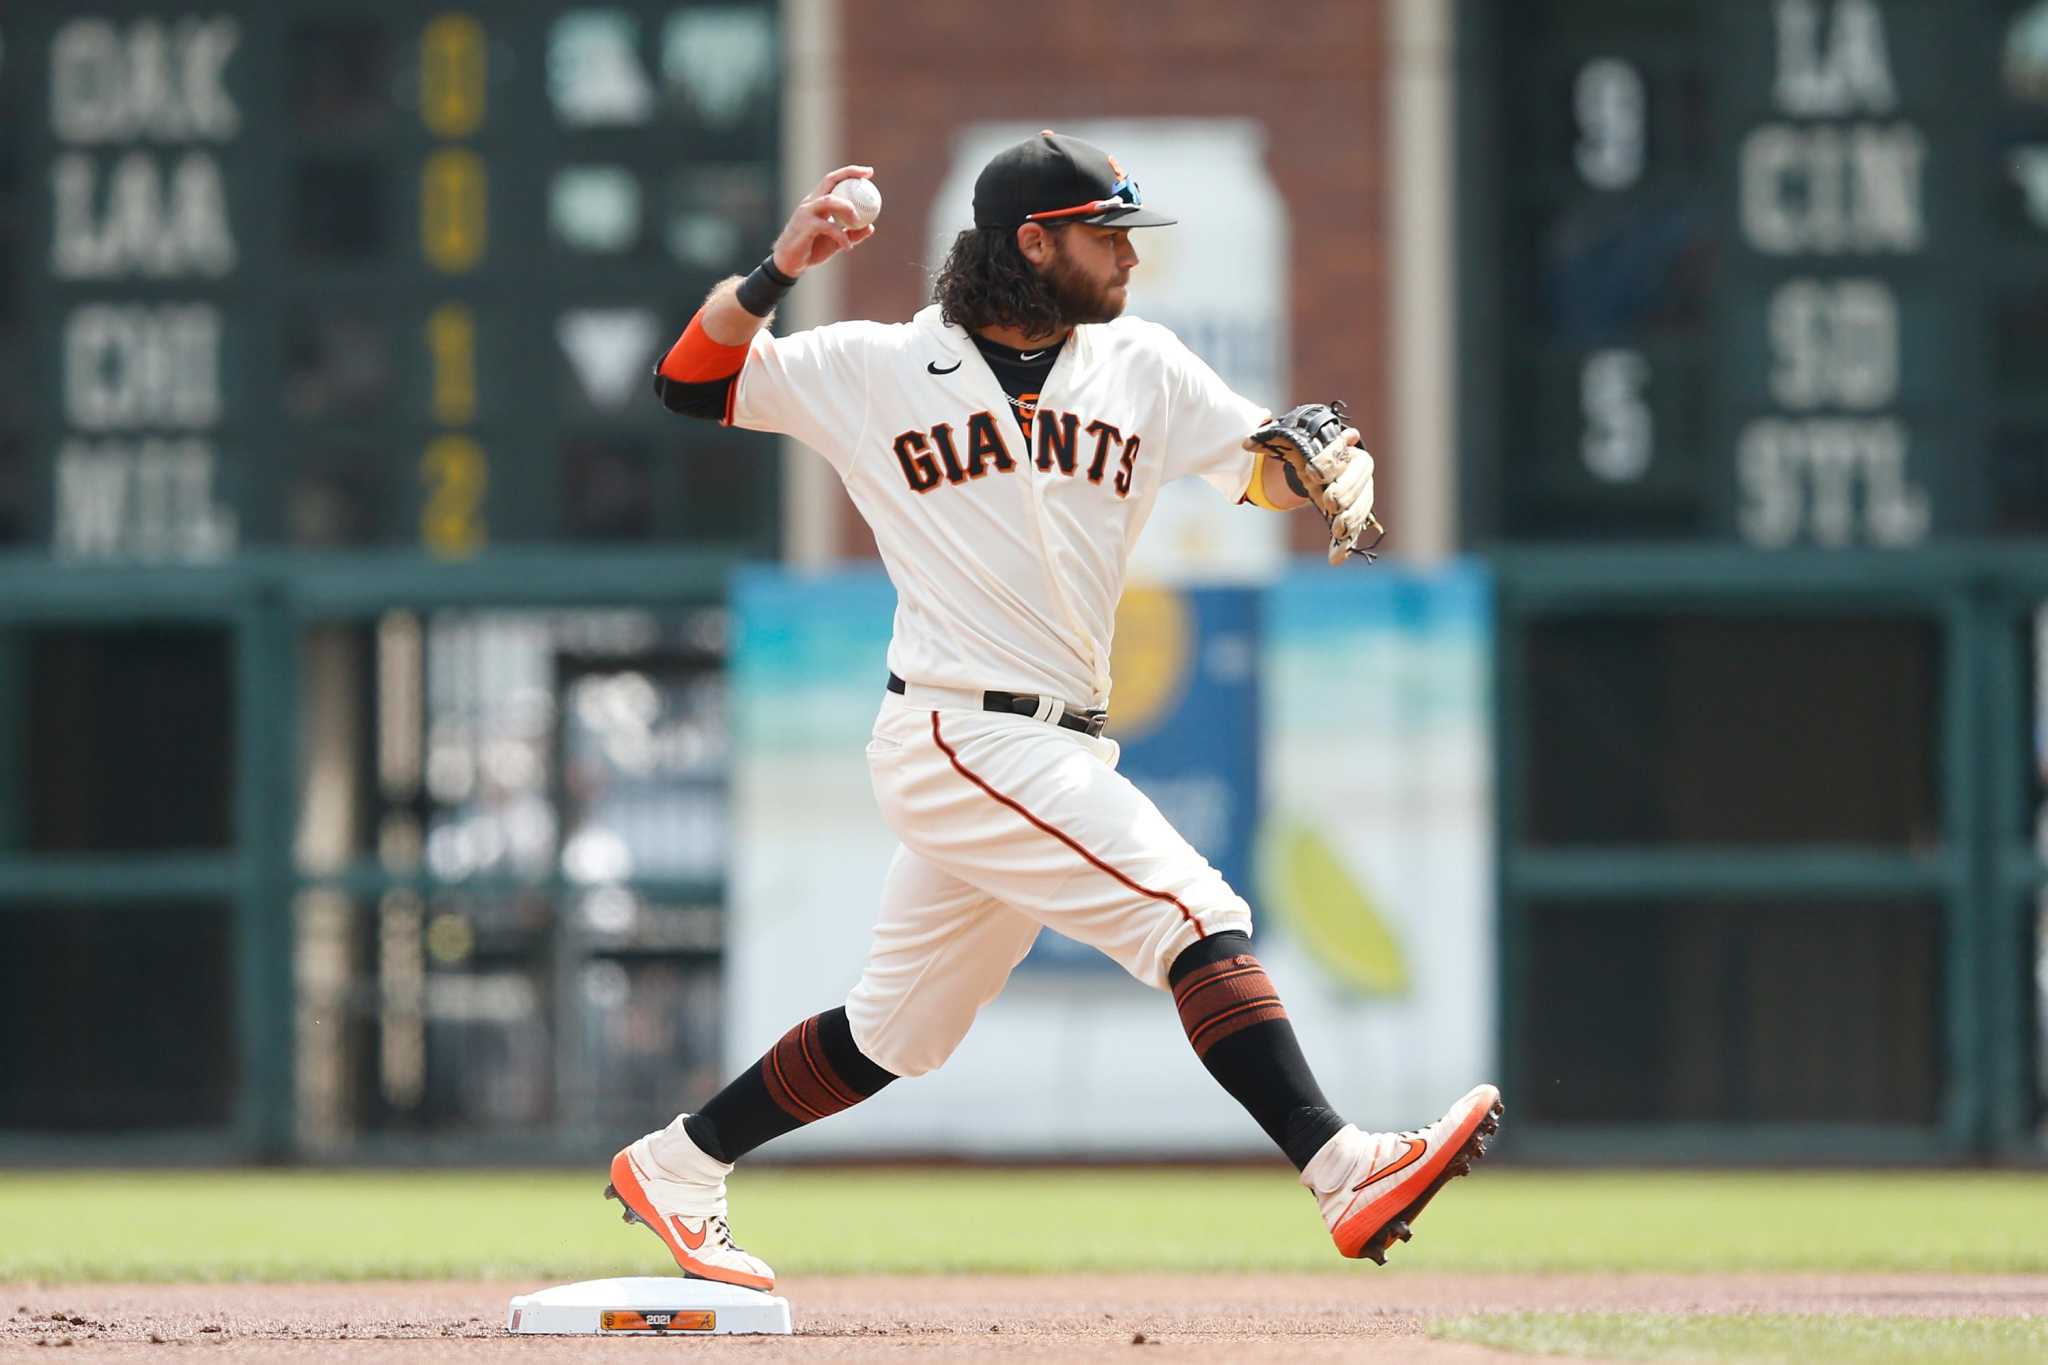 3 takeaways from the SF Giants series win over the Colorado Rockies